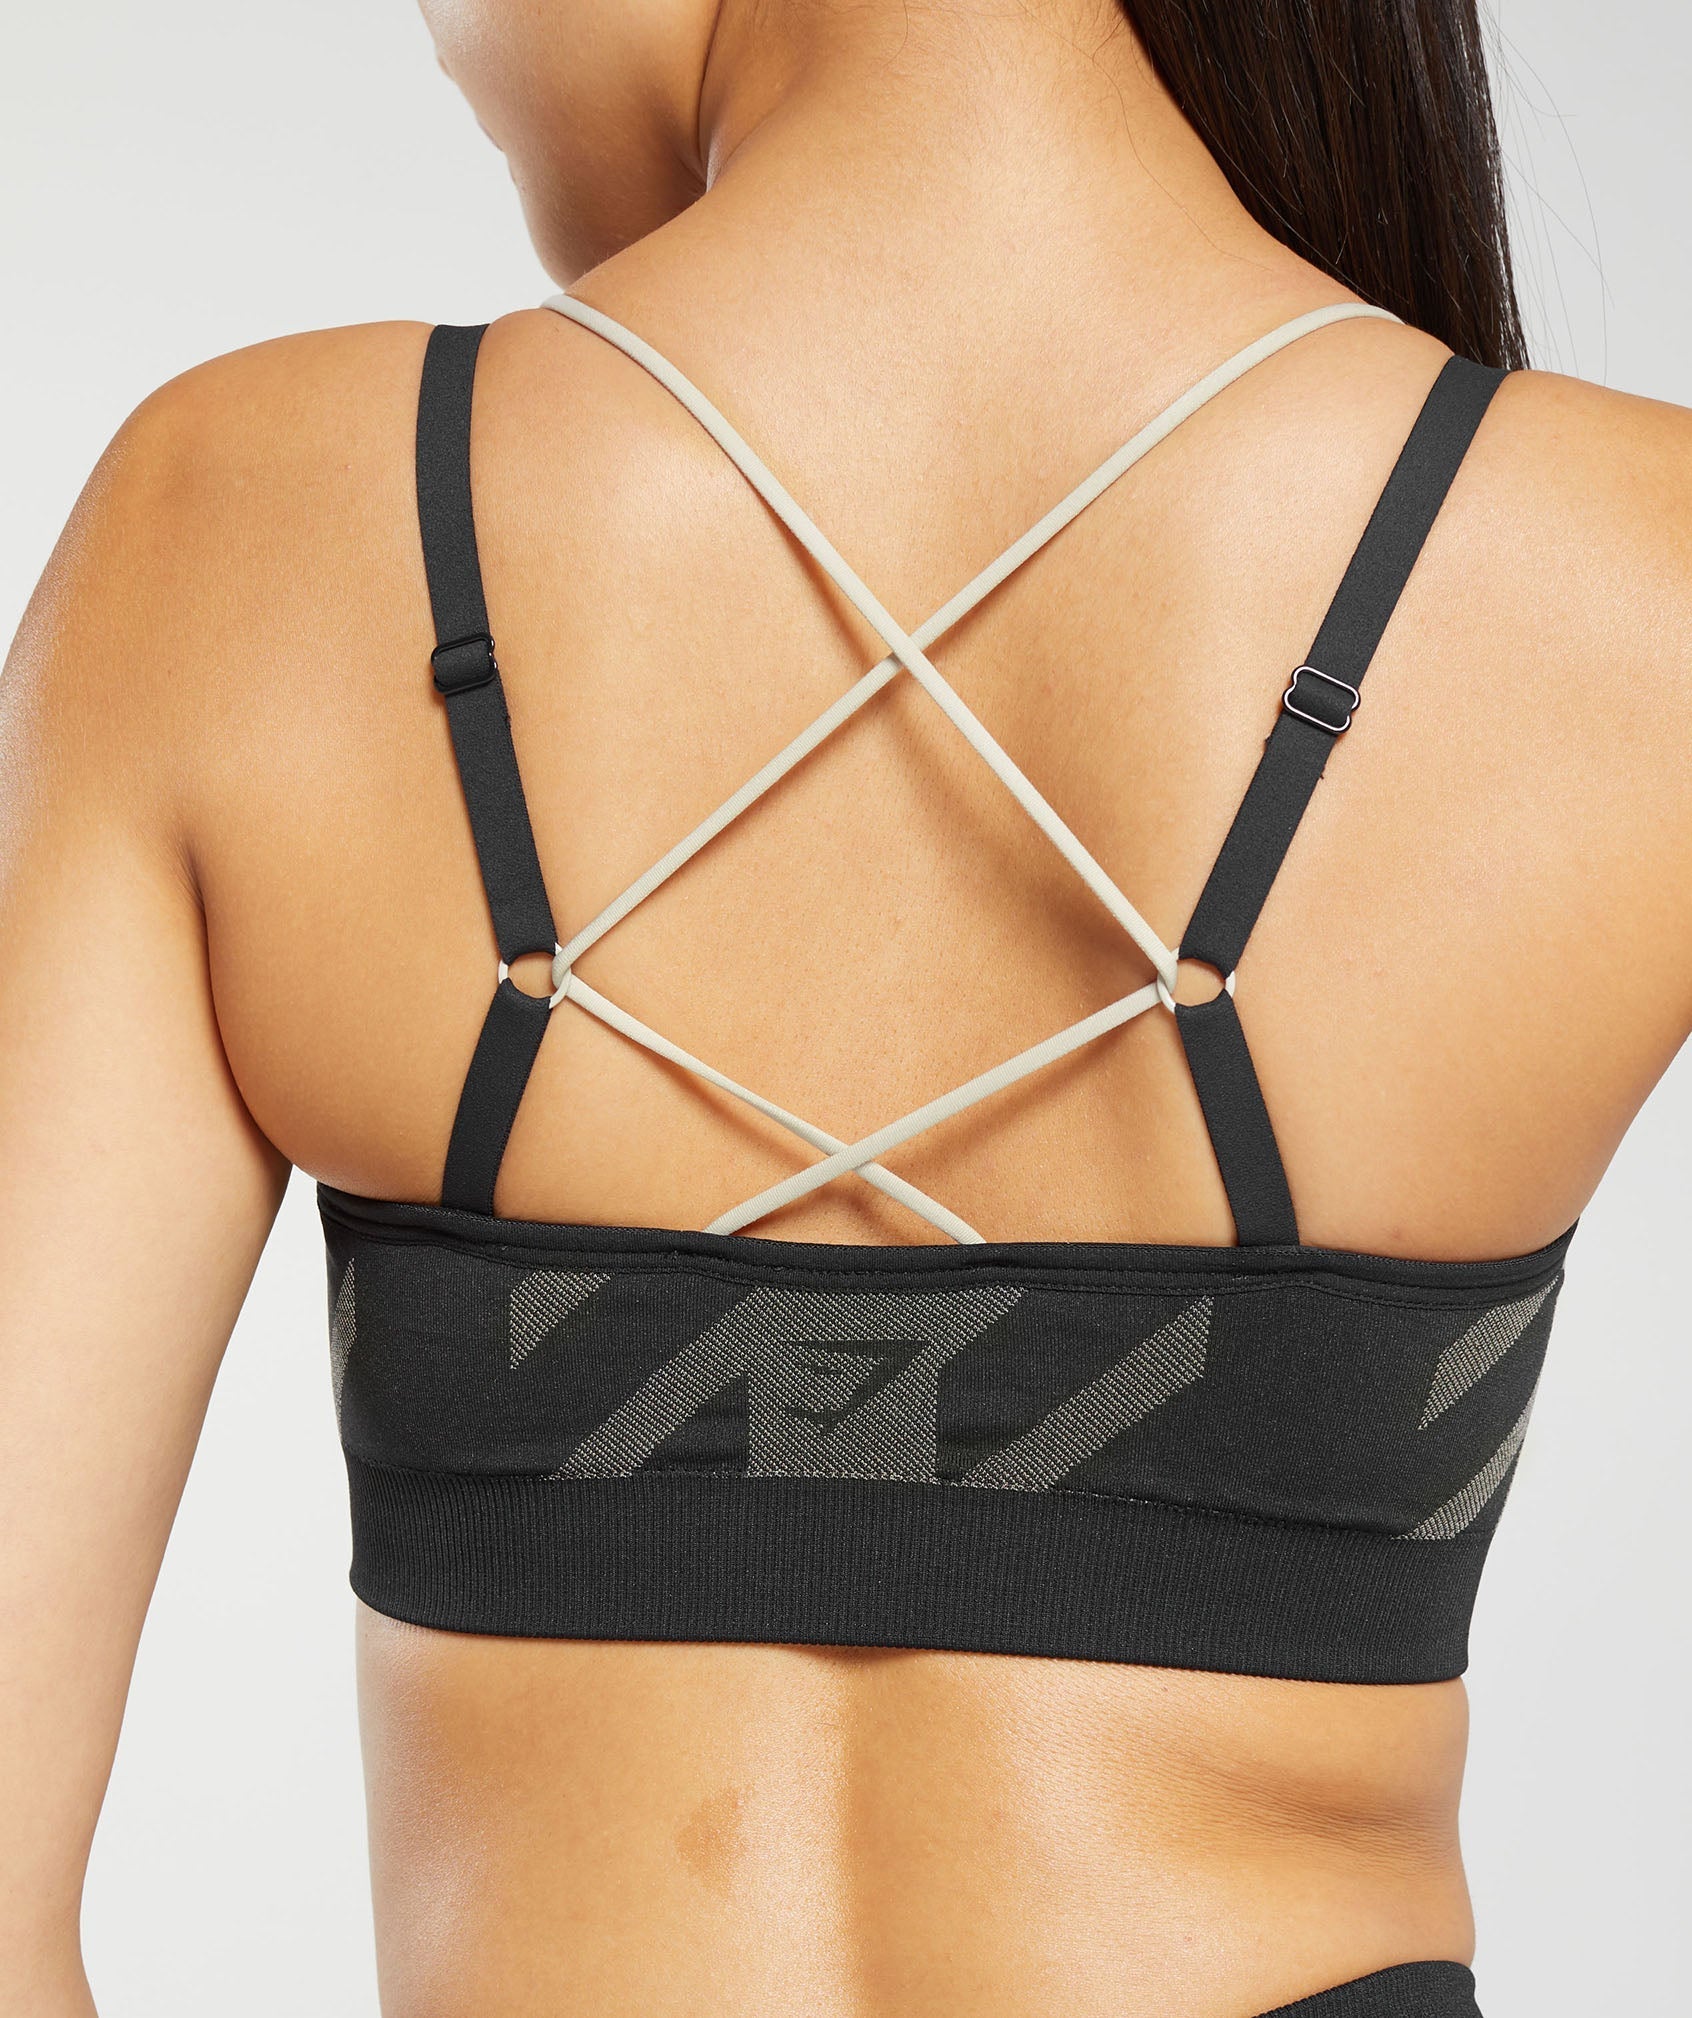 Apex Limit Seamless Ruched Sports Bra in Black/Washed Stone Brown - view 9